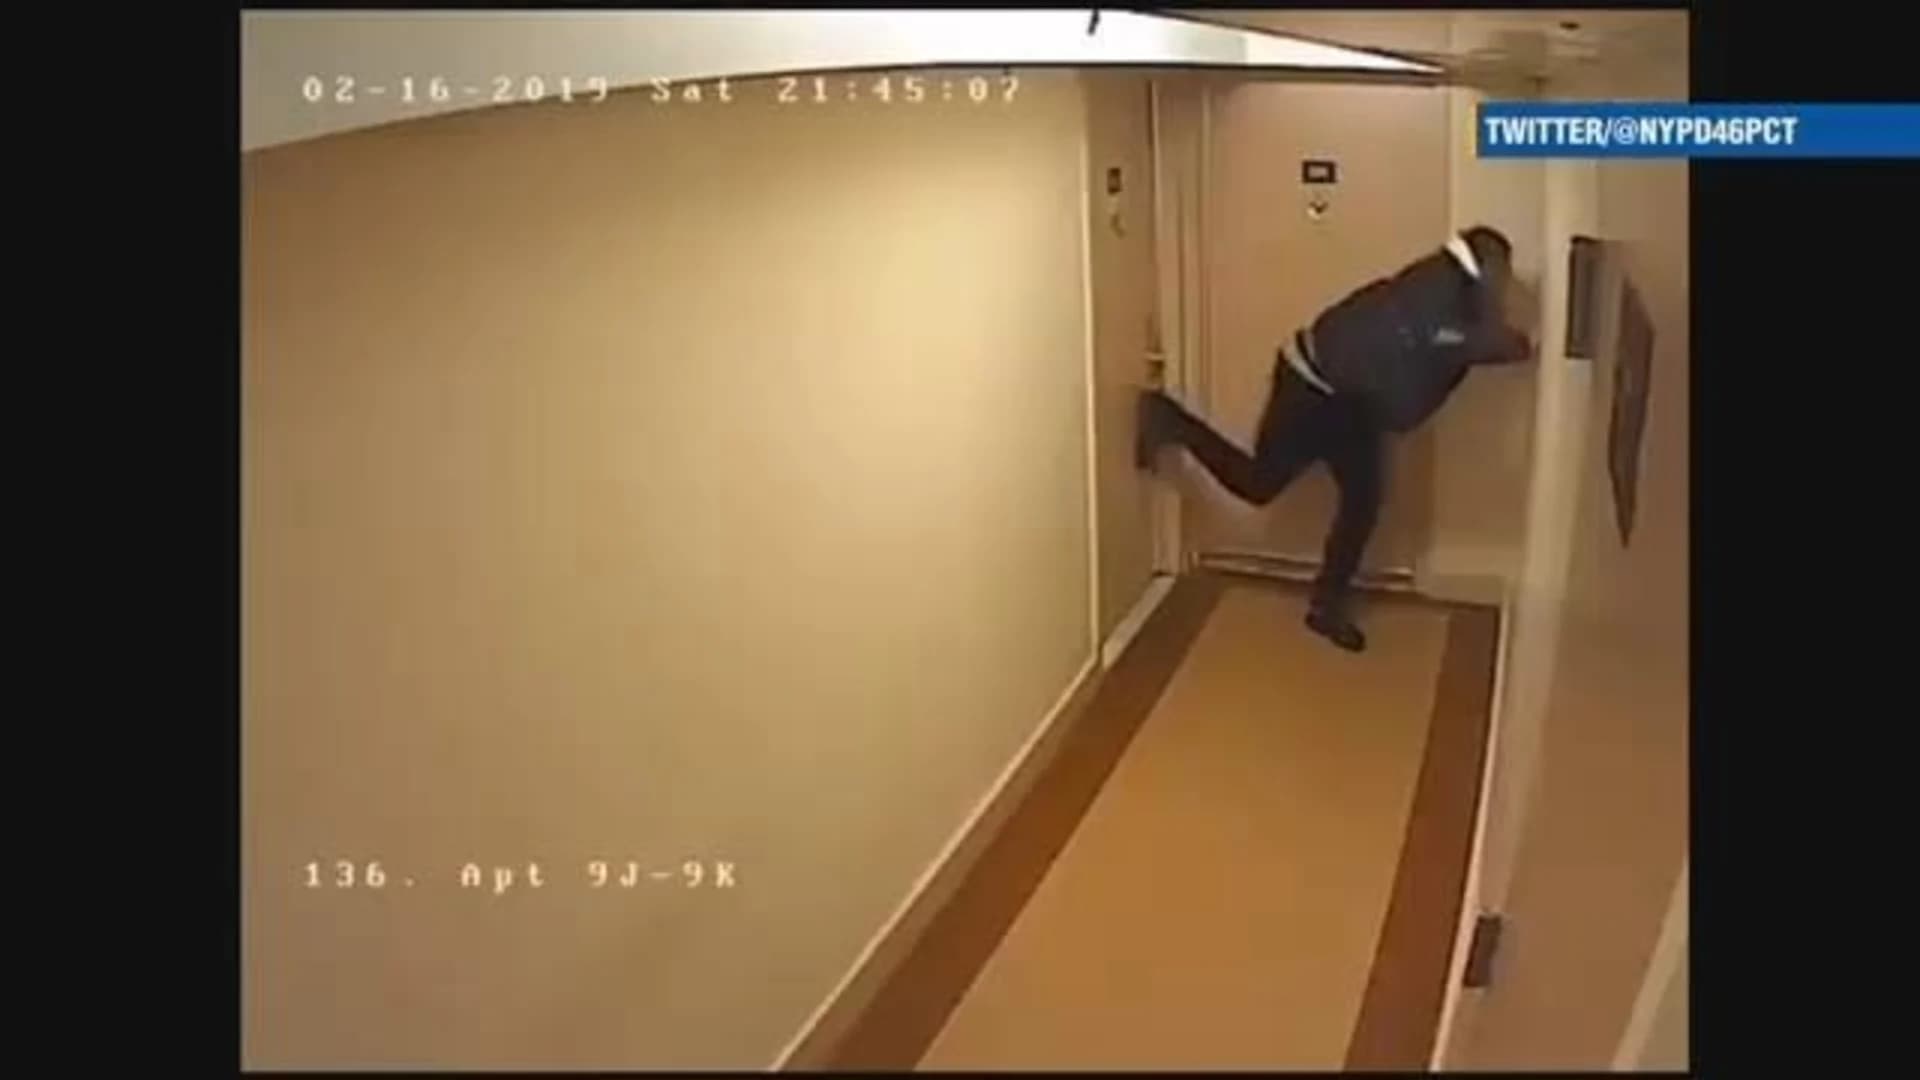 WATCH: Man takes anger out on apartment door, walls